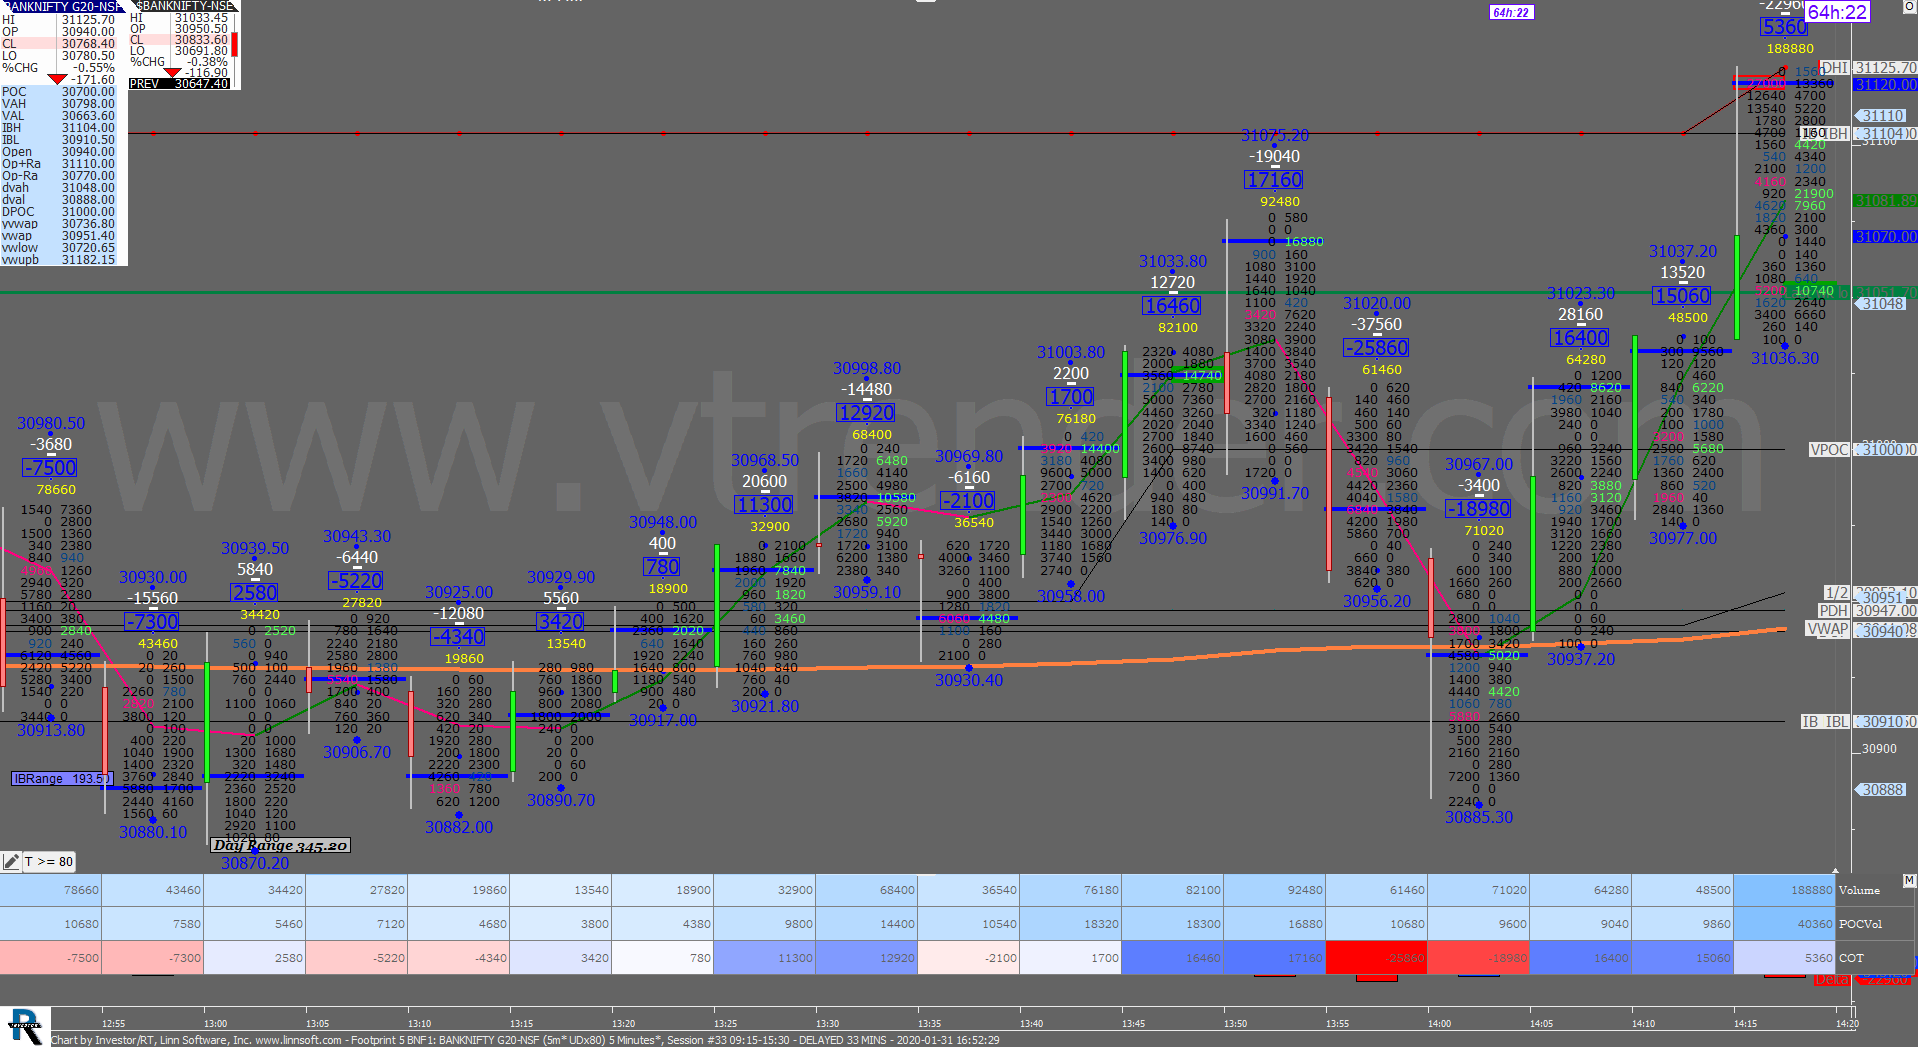 4 41 Order Flow Charts Dated 31St Jan 2020 (5 Mins) Banknifty Futures, Day Trading, Intraday Trading, Intraday Trading Strategies, Nifty Futures, Order Flow Analysis, Support And Resistance, Trading Strategies, Volume Profile Trading